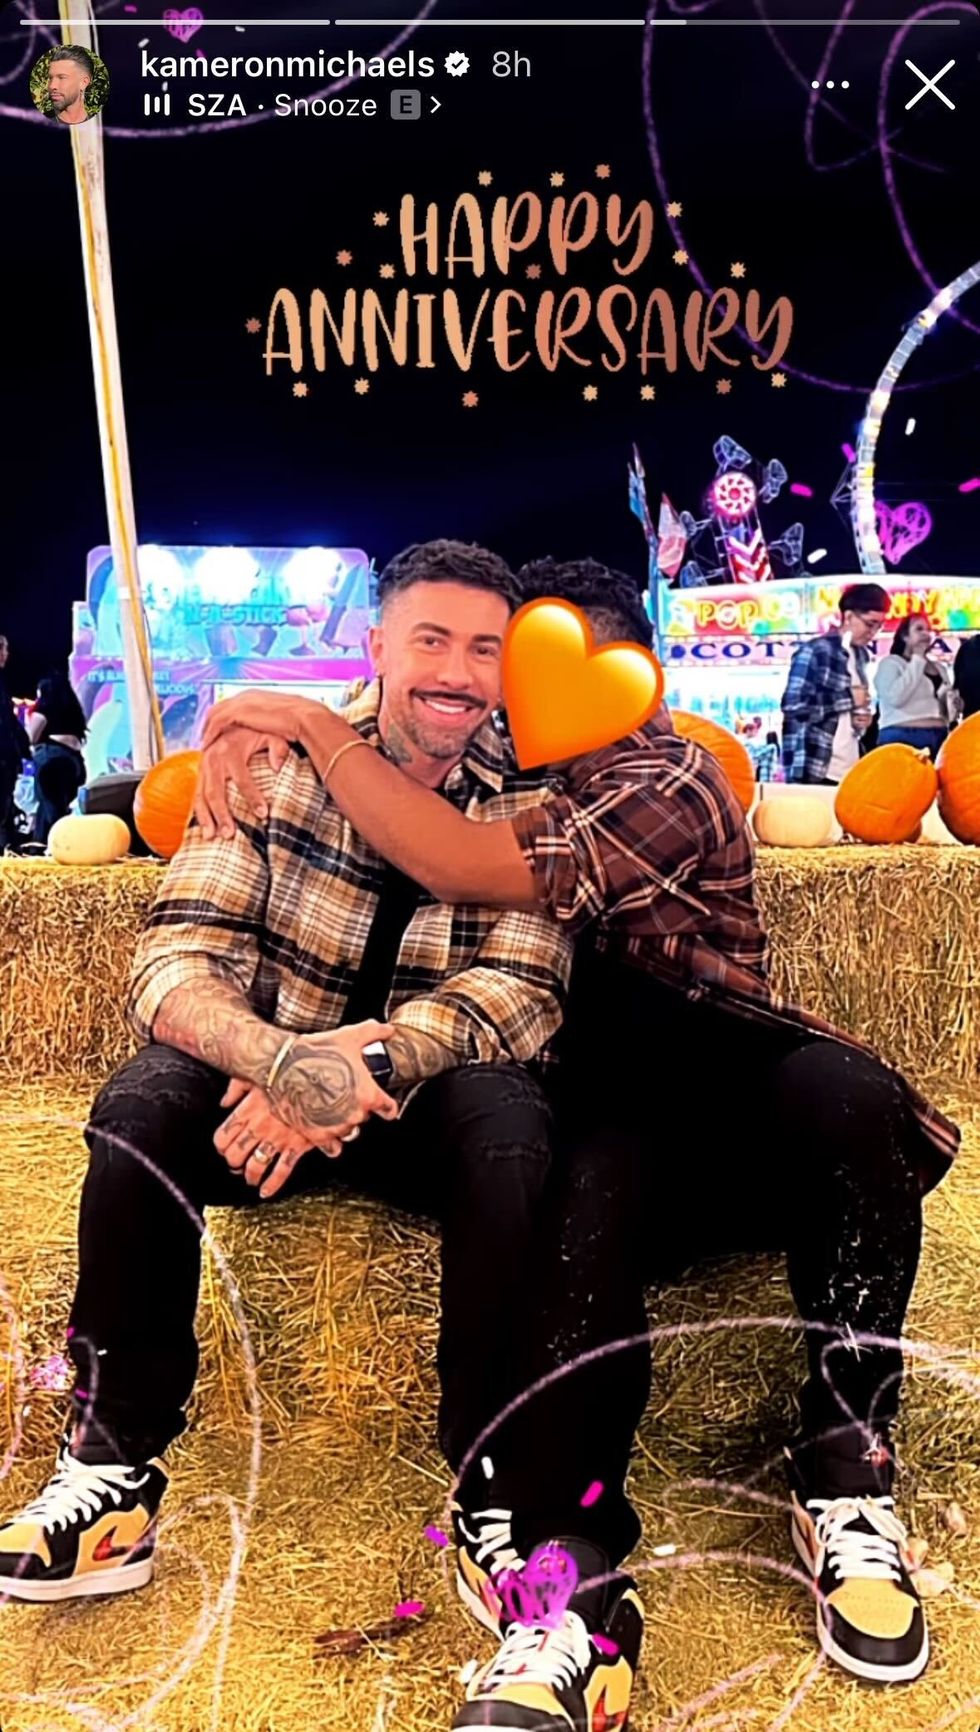 Kameron Michaels sitting on a hay bale with his new boyfriend.